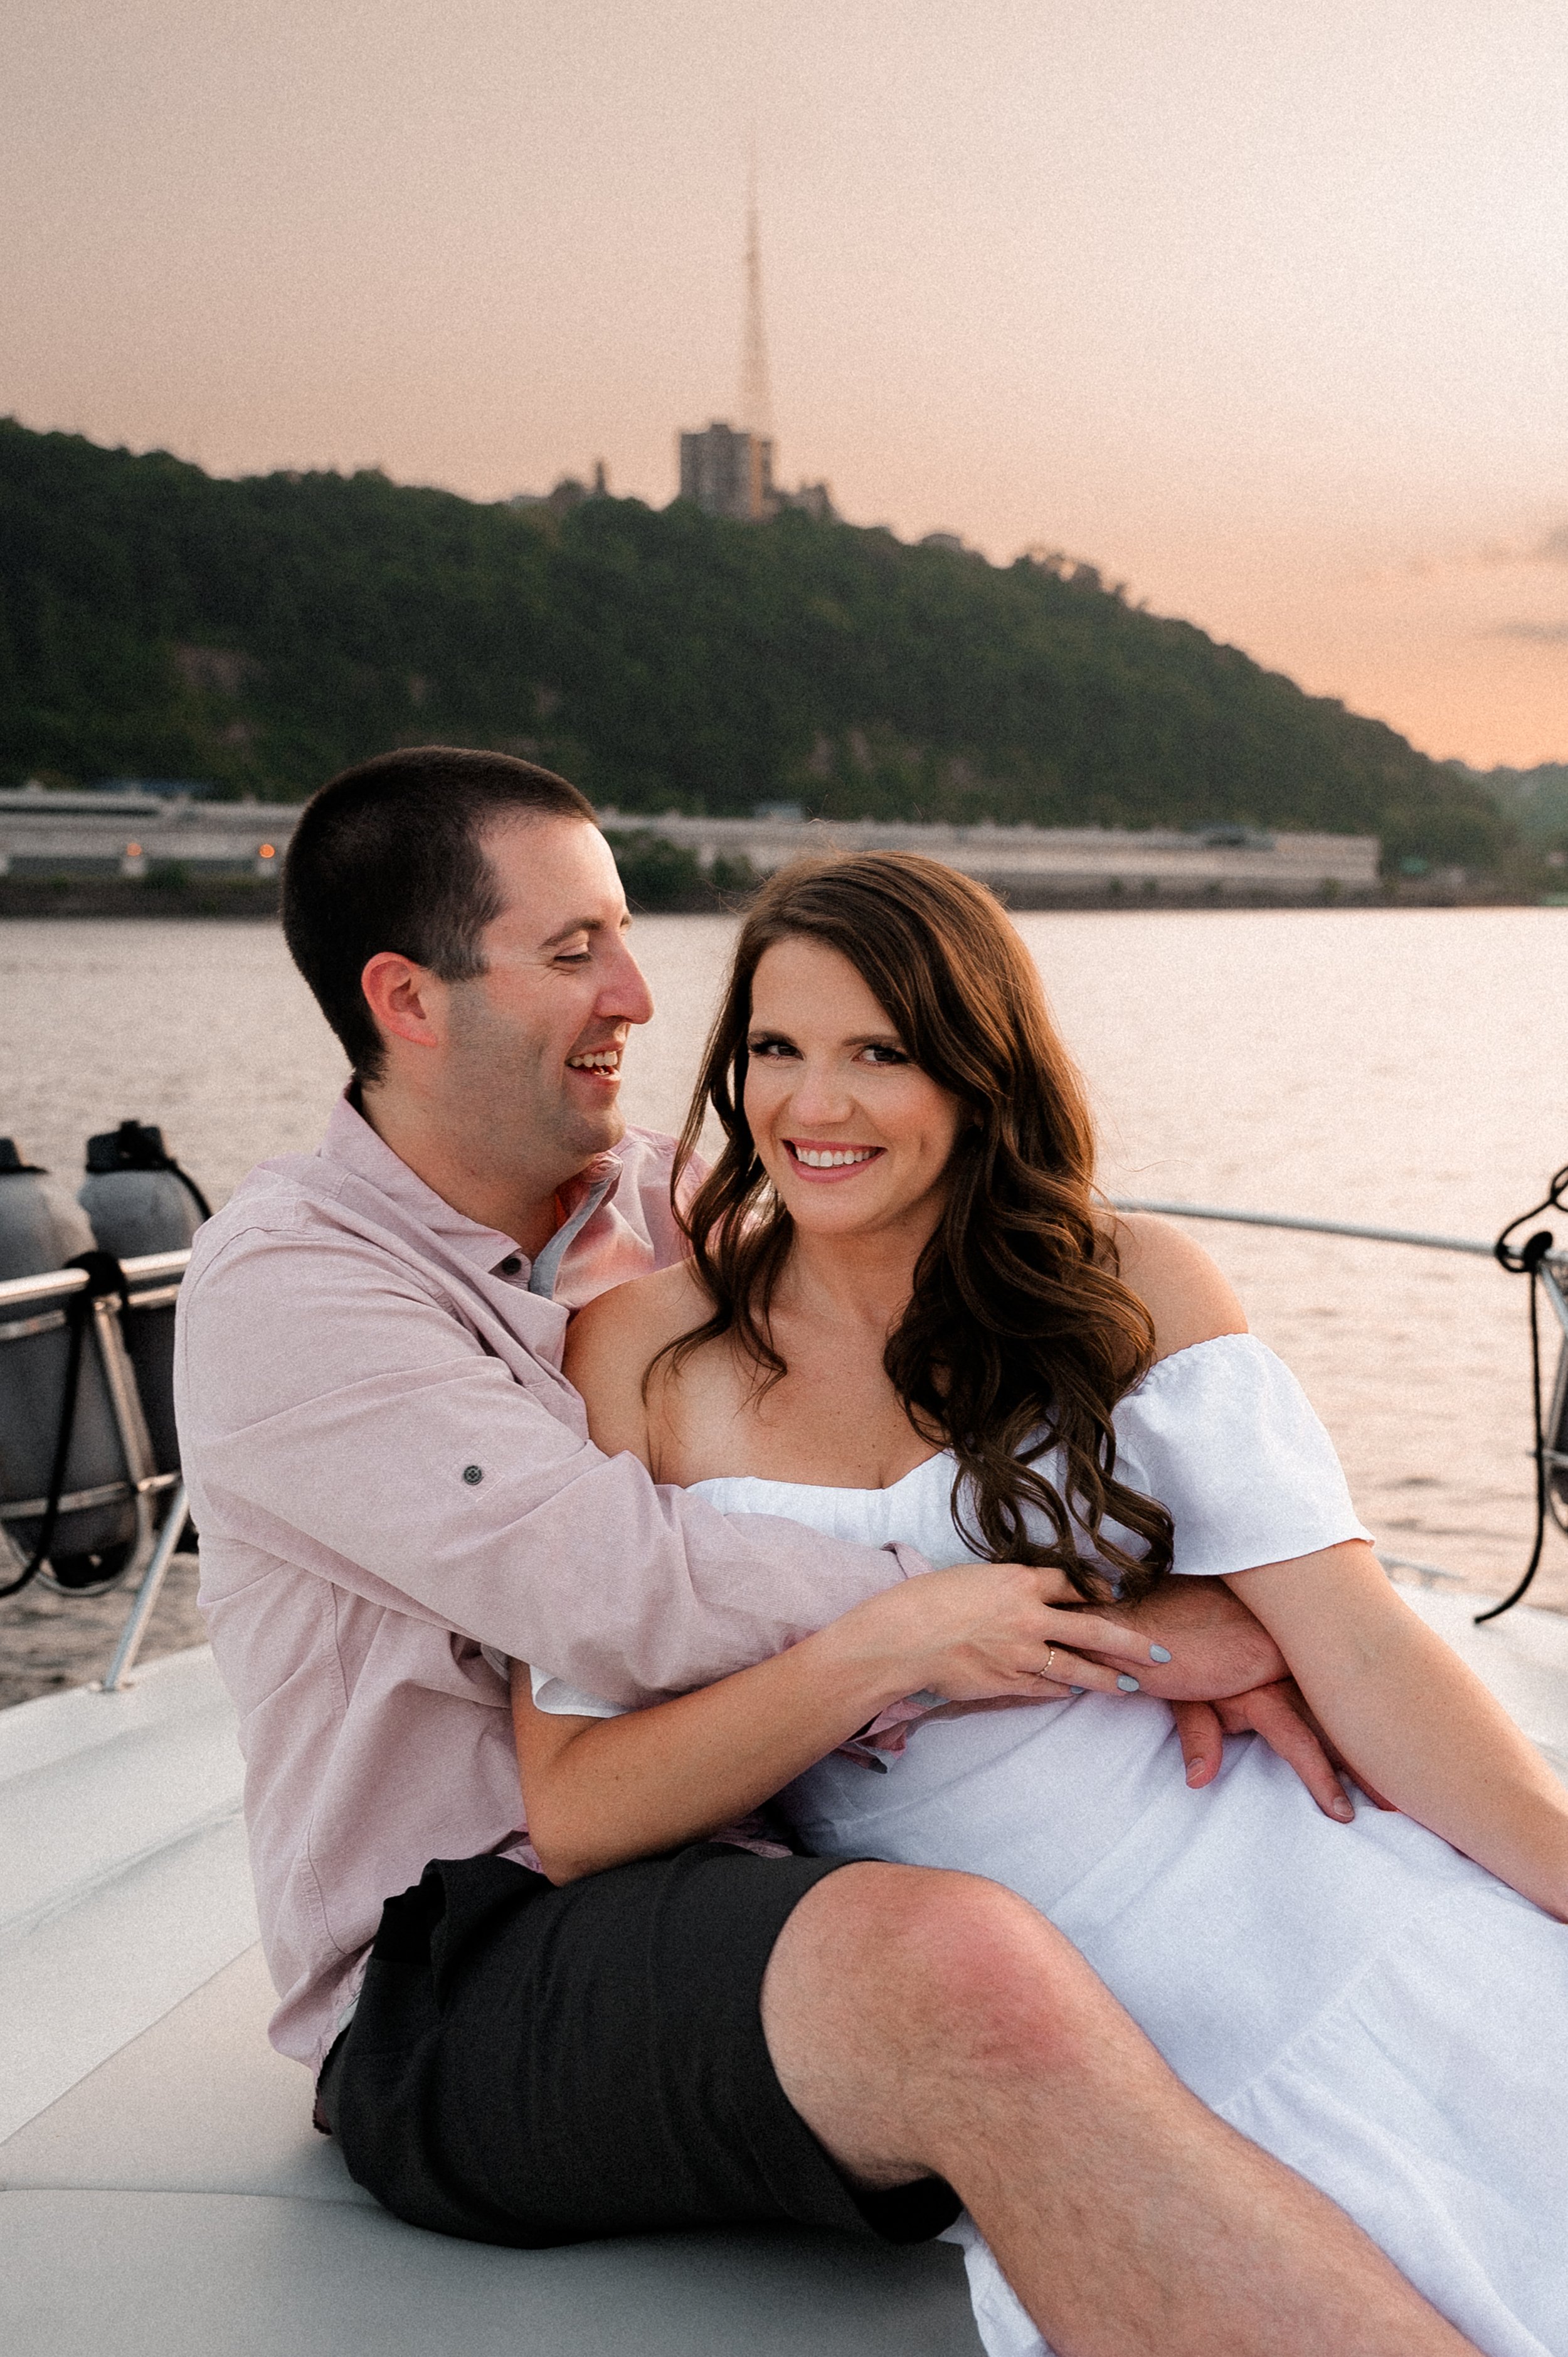 pittsburgh romantic boat down the river t engagement session art-4.jpg